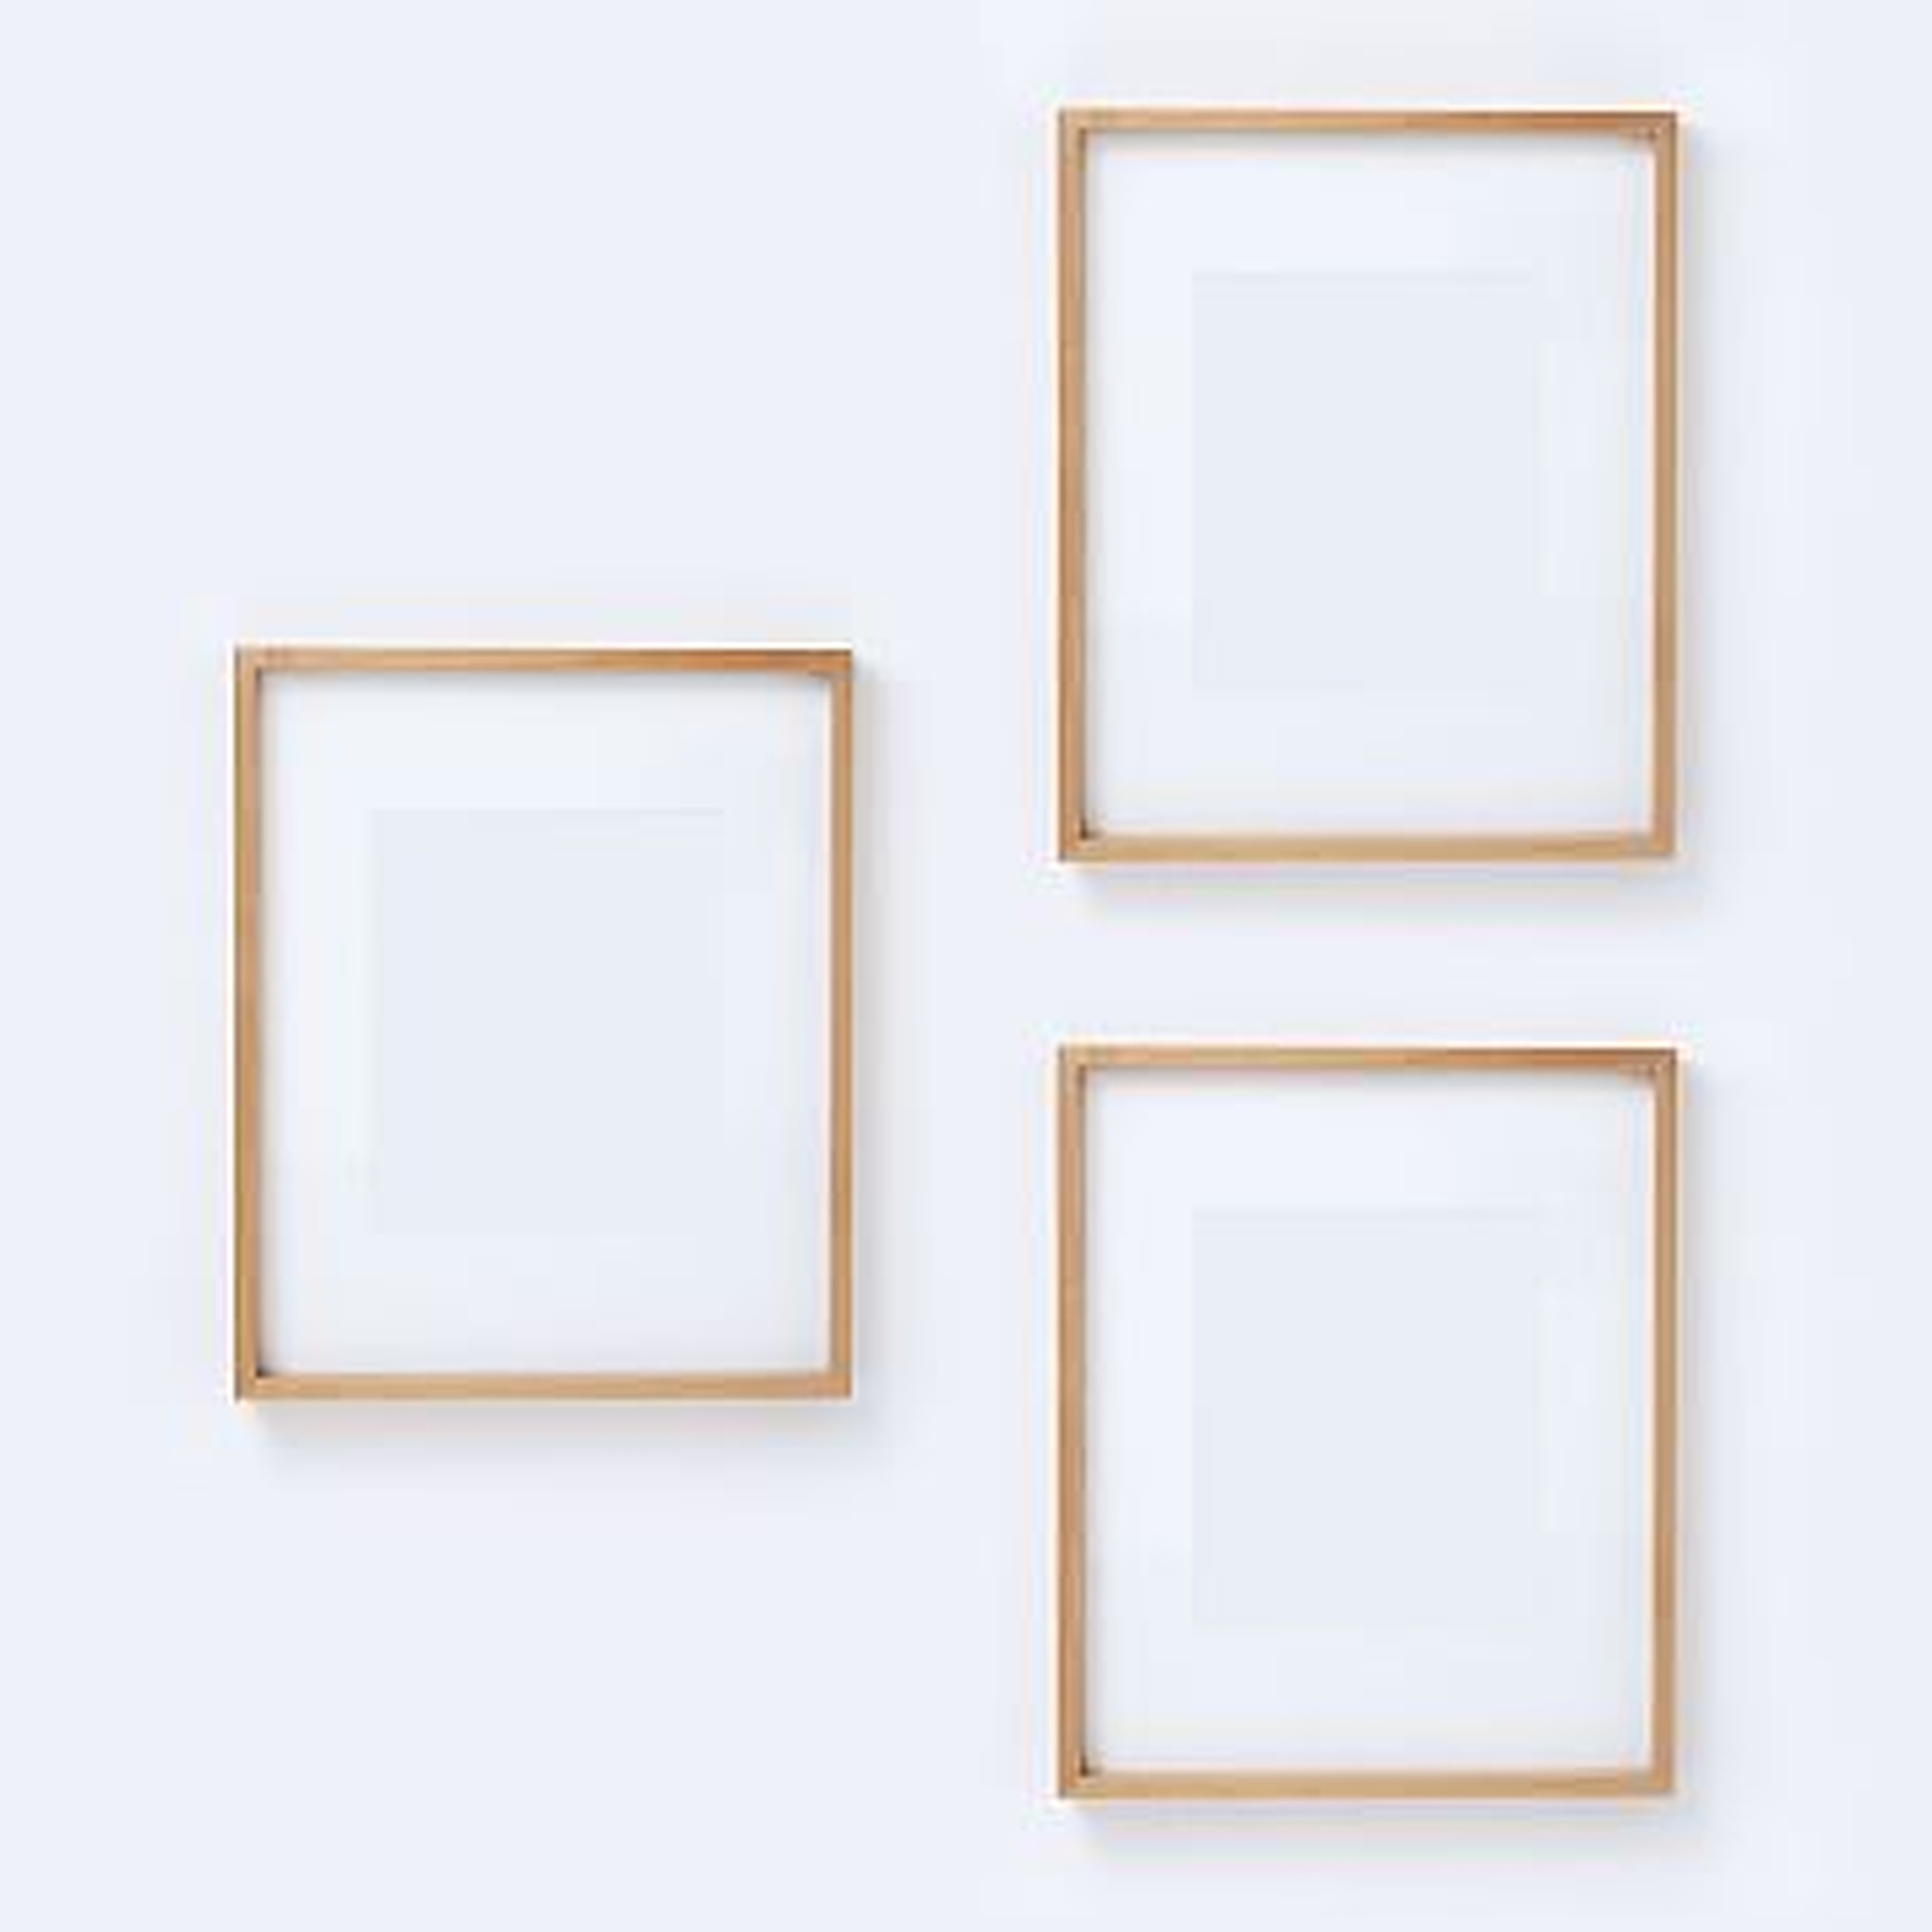 Thin Wood Gallery Frame, Bamboo, Set of 3, 15.5"x19.5" (8"x10" opening with mat) - West Elm